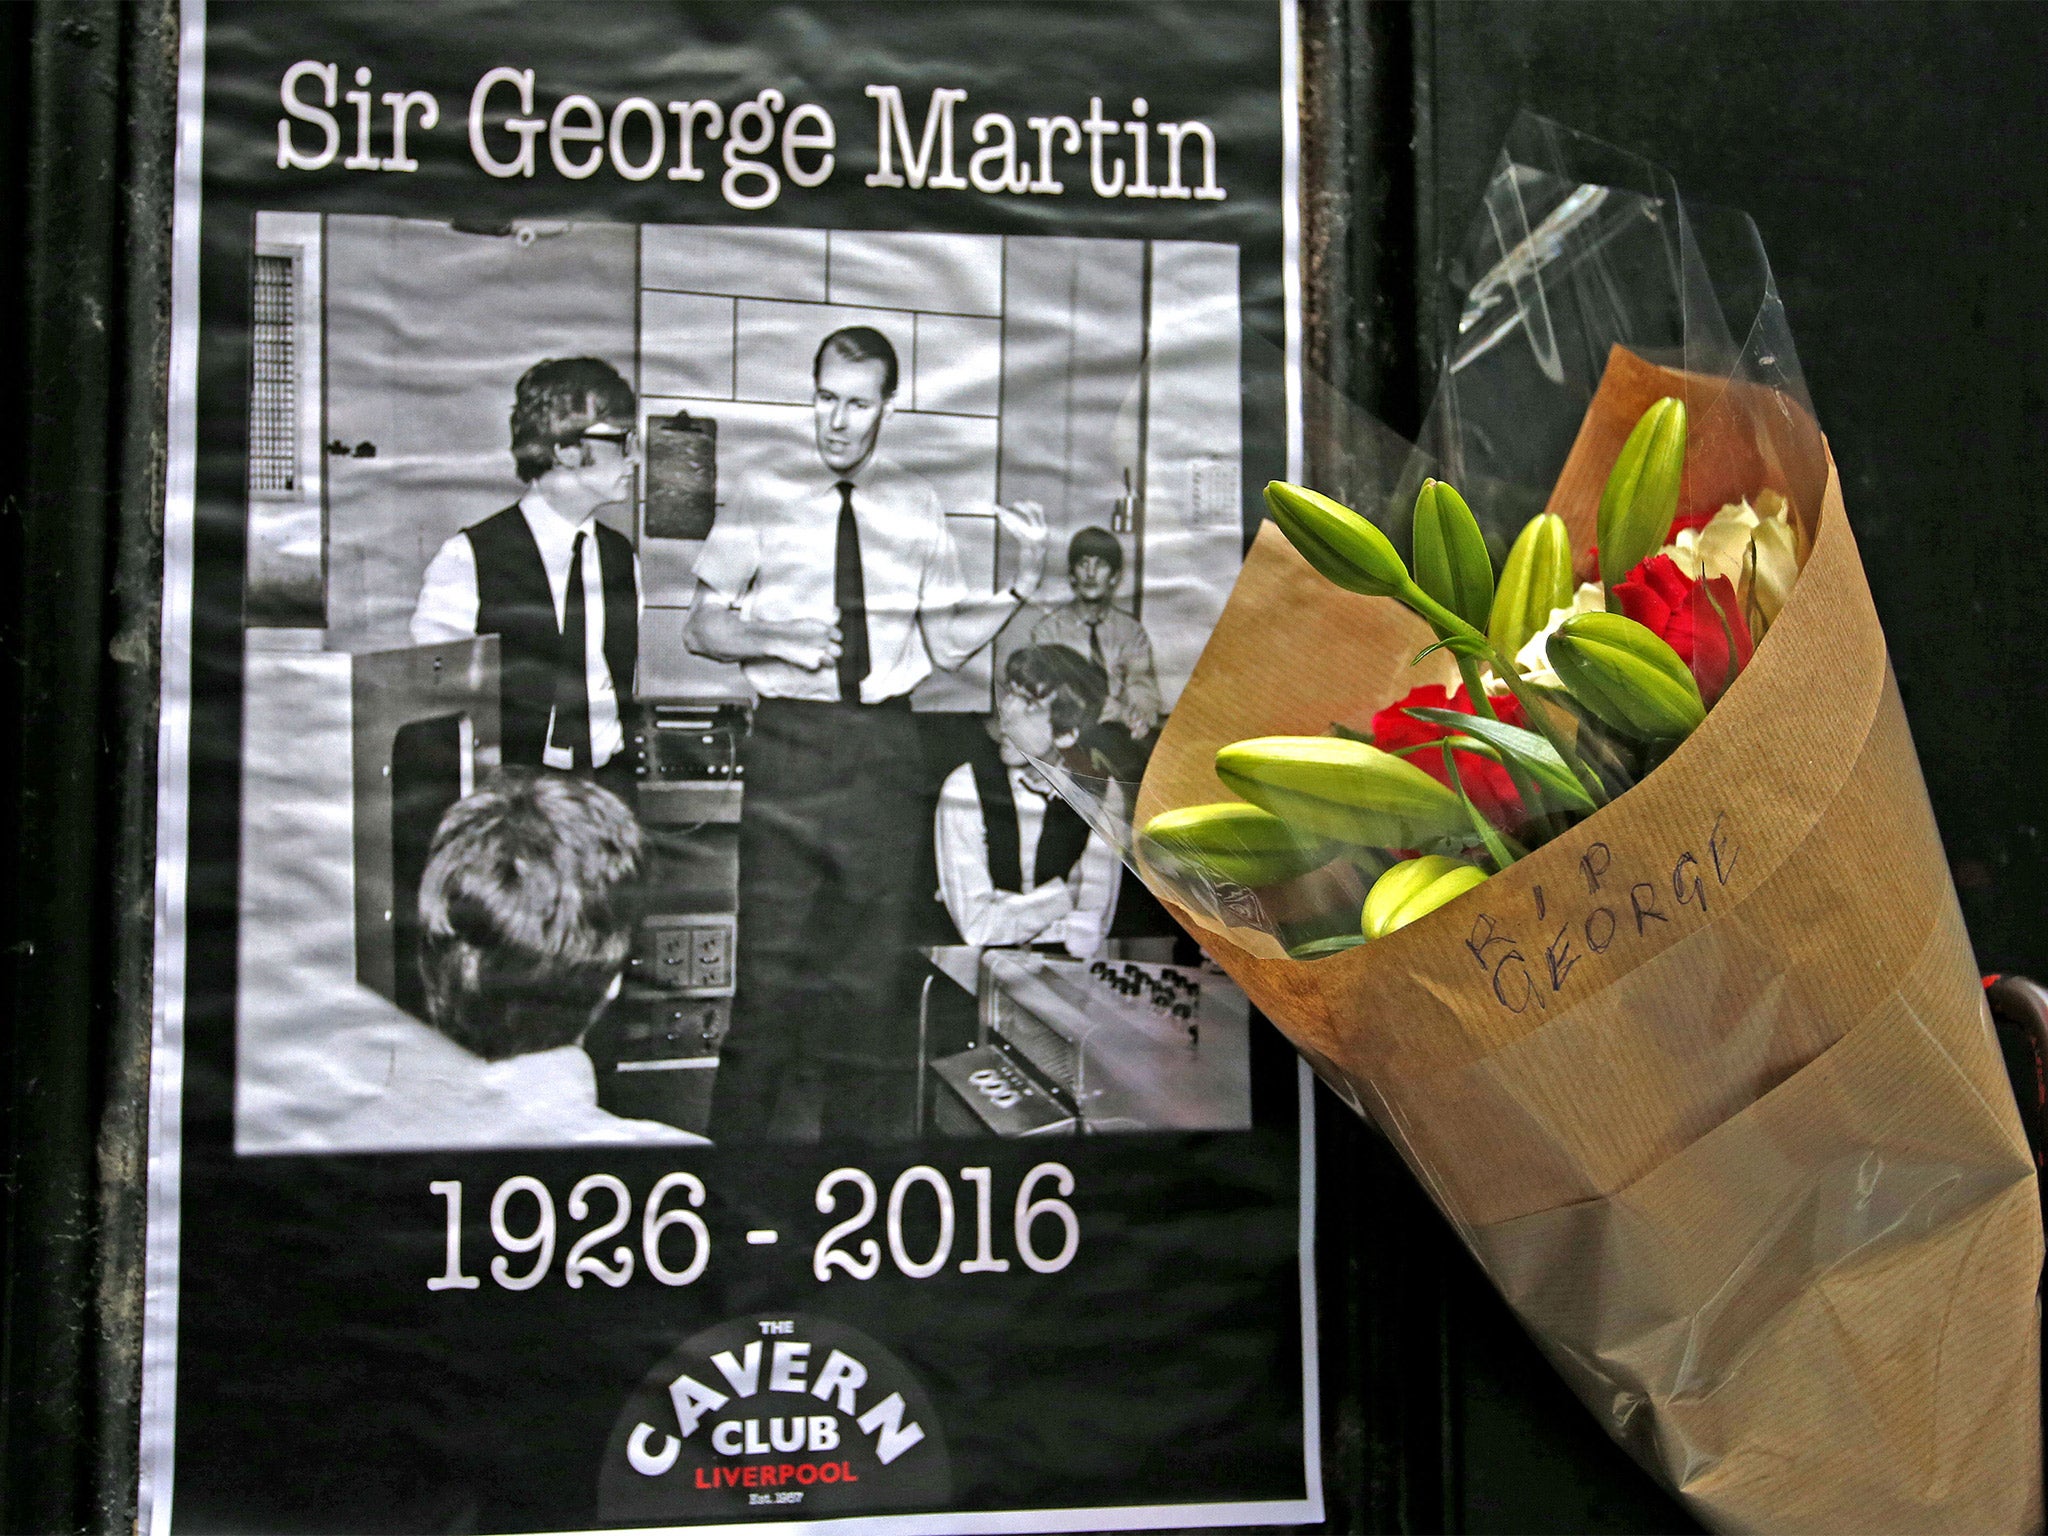 Tributes to the record producer Sir George Martin are placed at The Cavern in Liverpool, a venue made famous by The Beatles